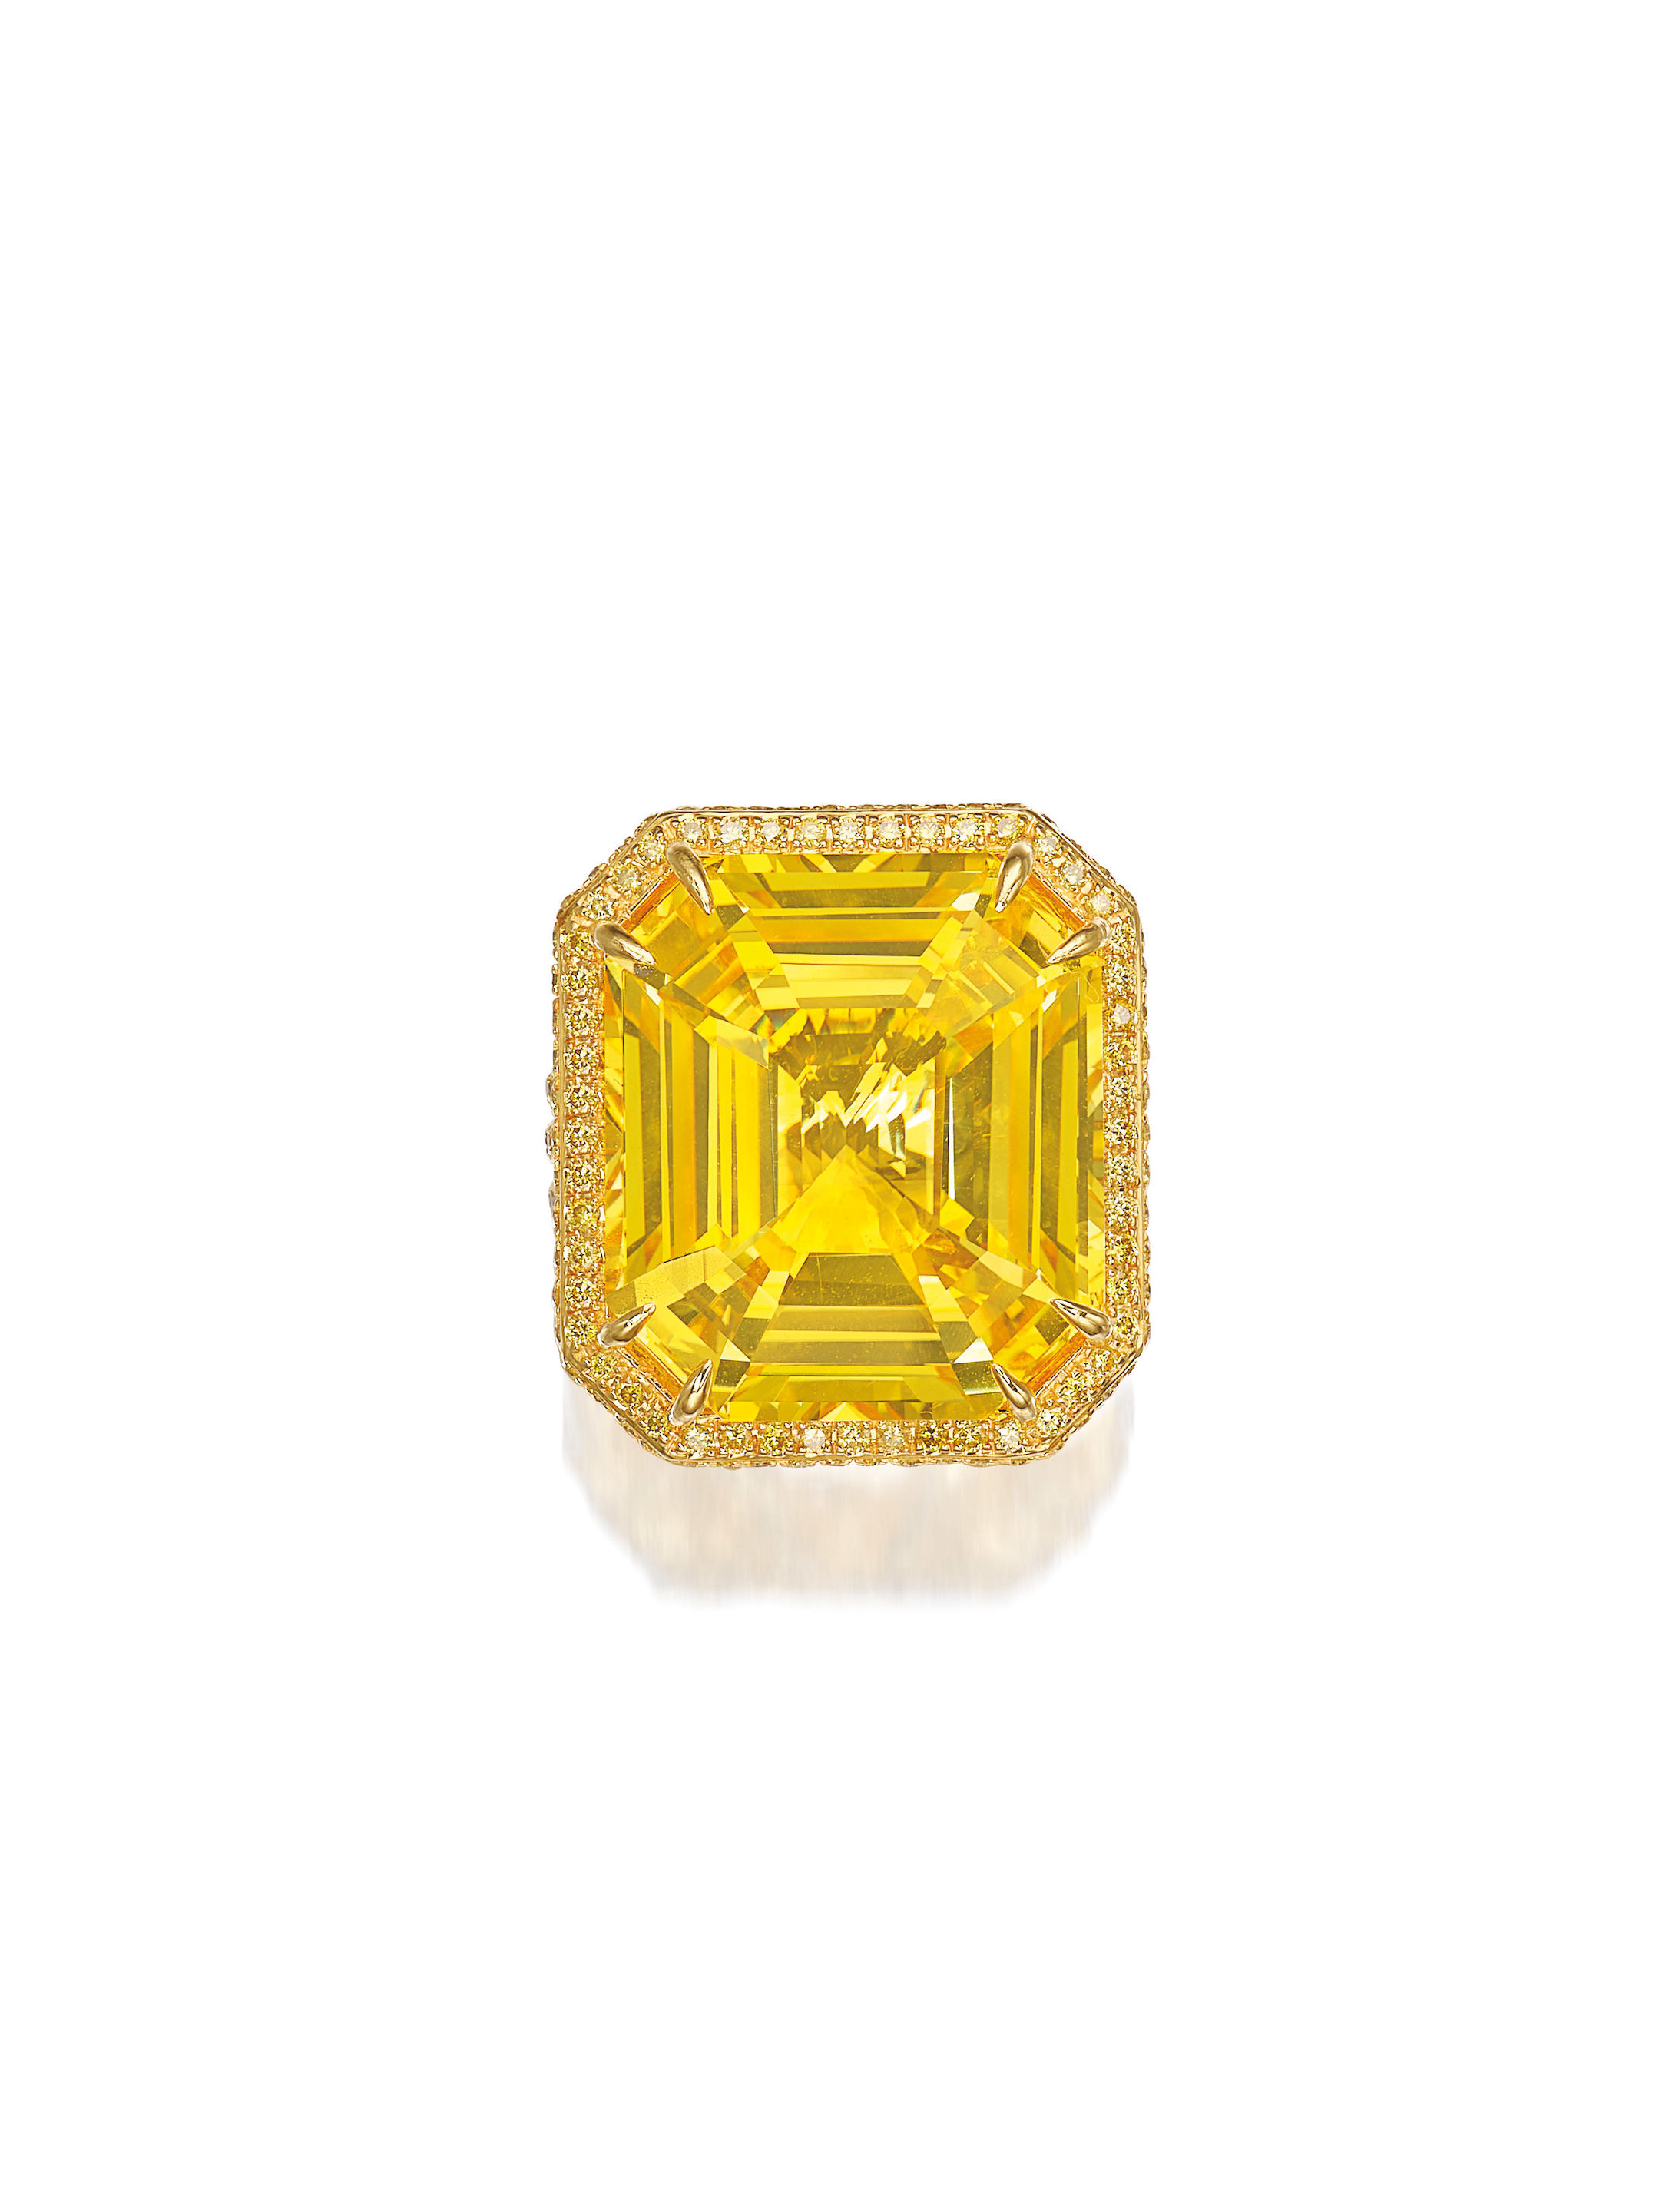 A YELLOW SAPPHIRE AND COLOURED DIAMOND RING